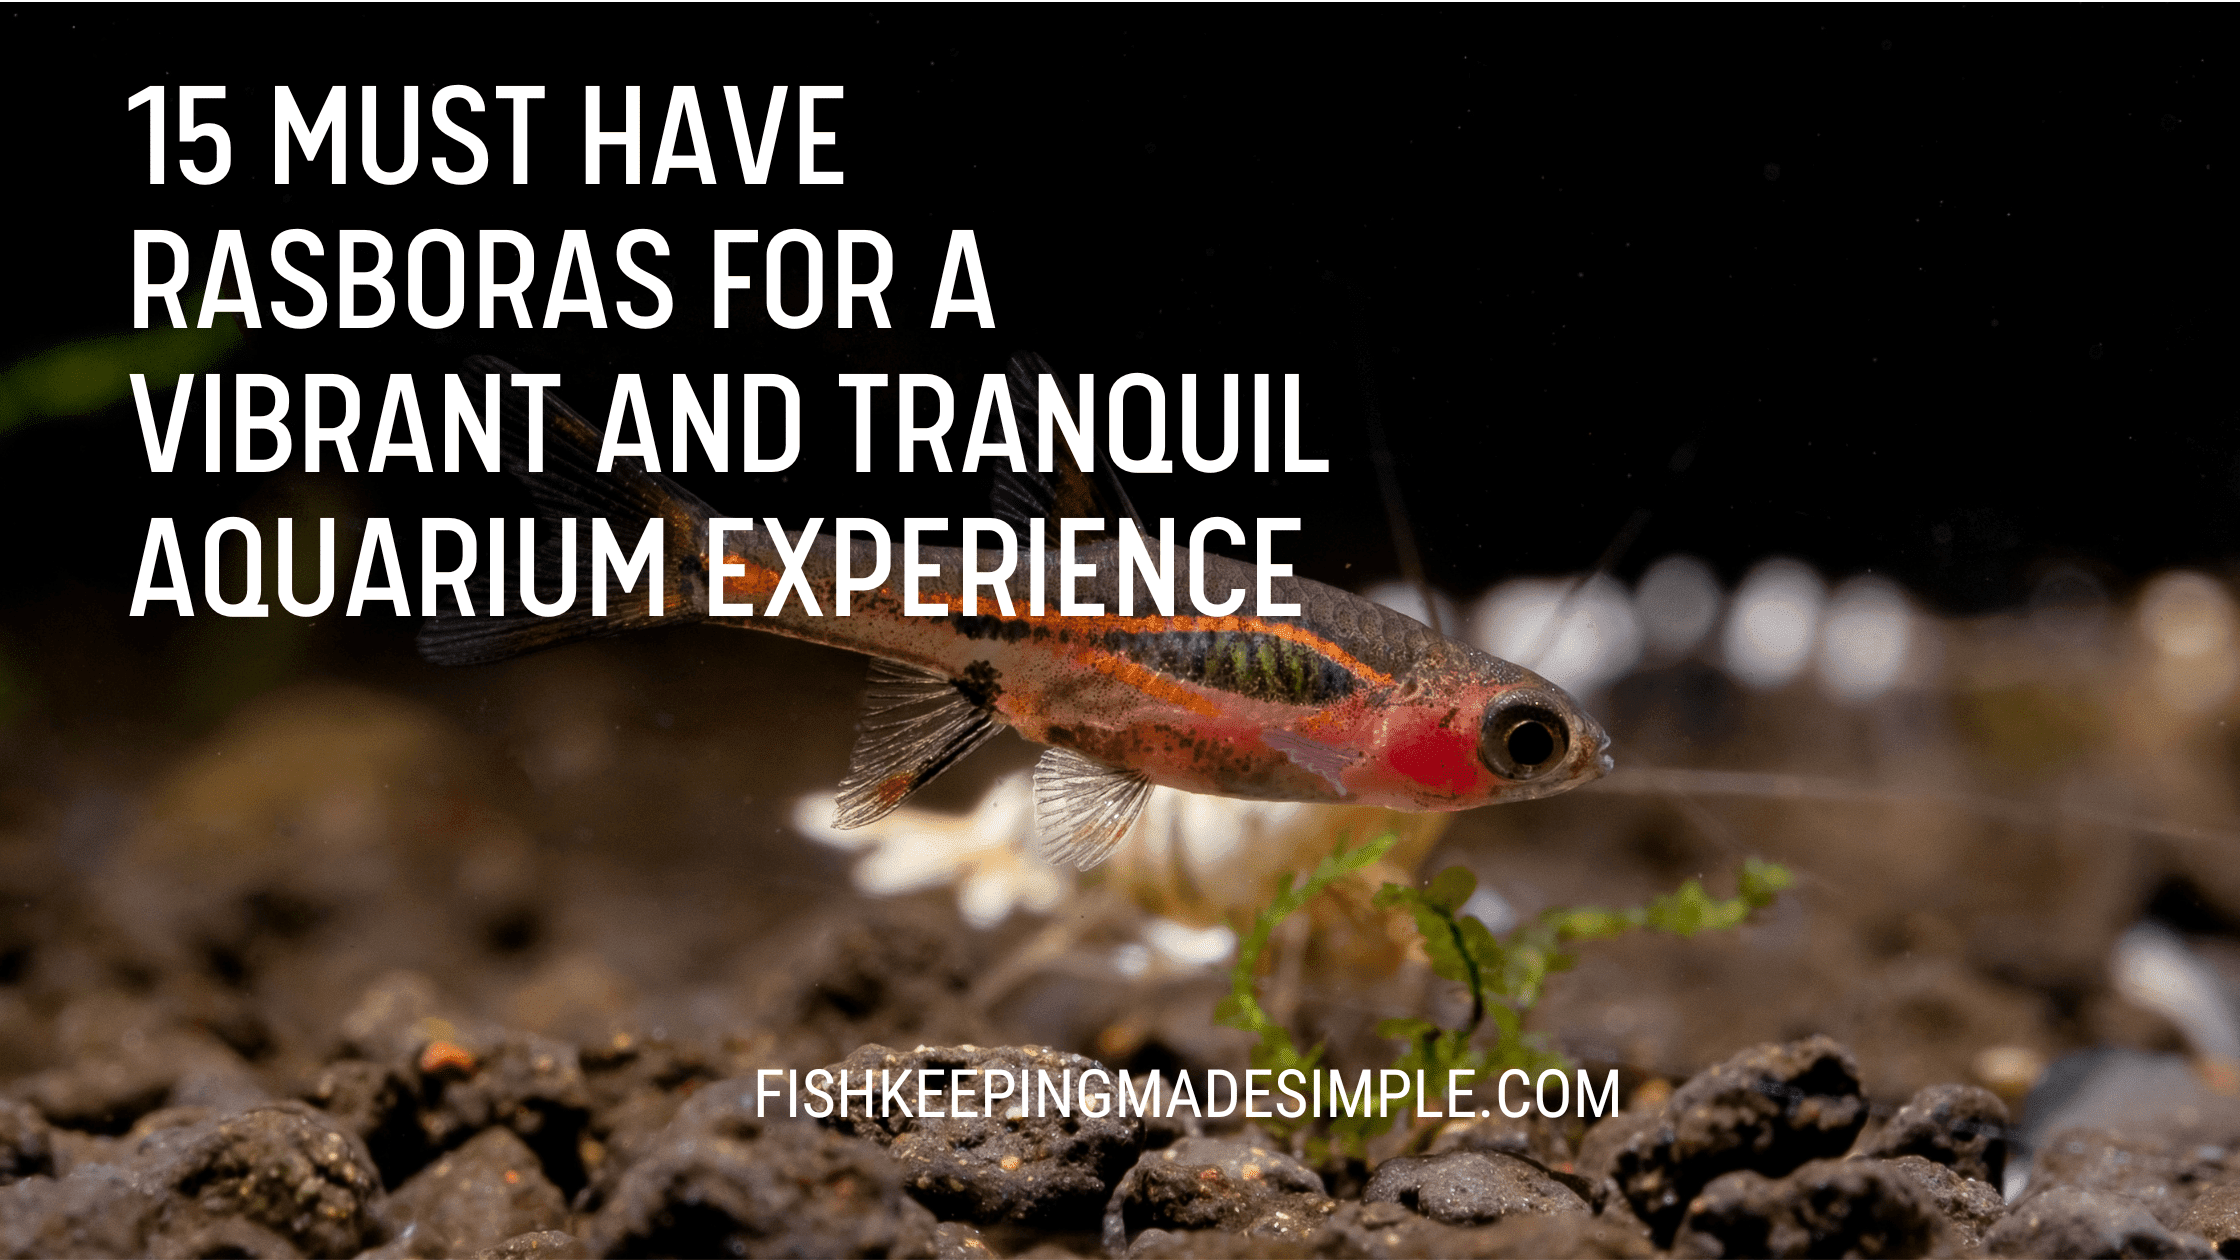 15 Must Have Rasboras for a Vibrant and Tranquil Aquarium Experience